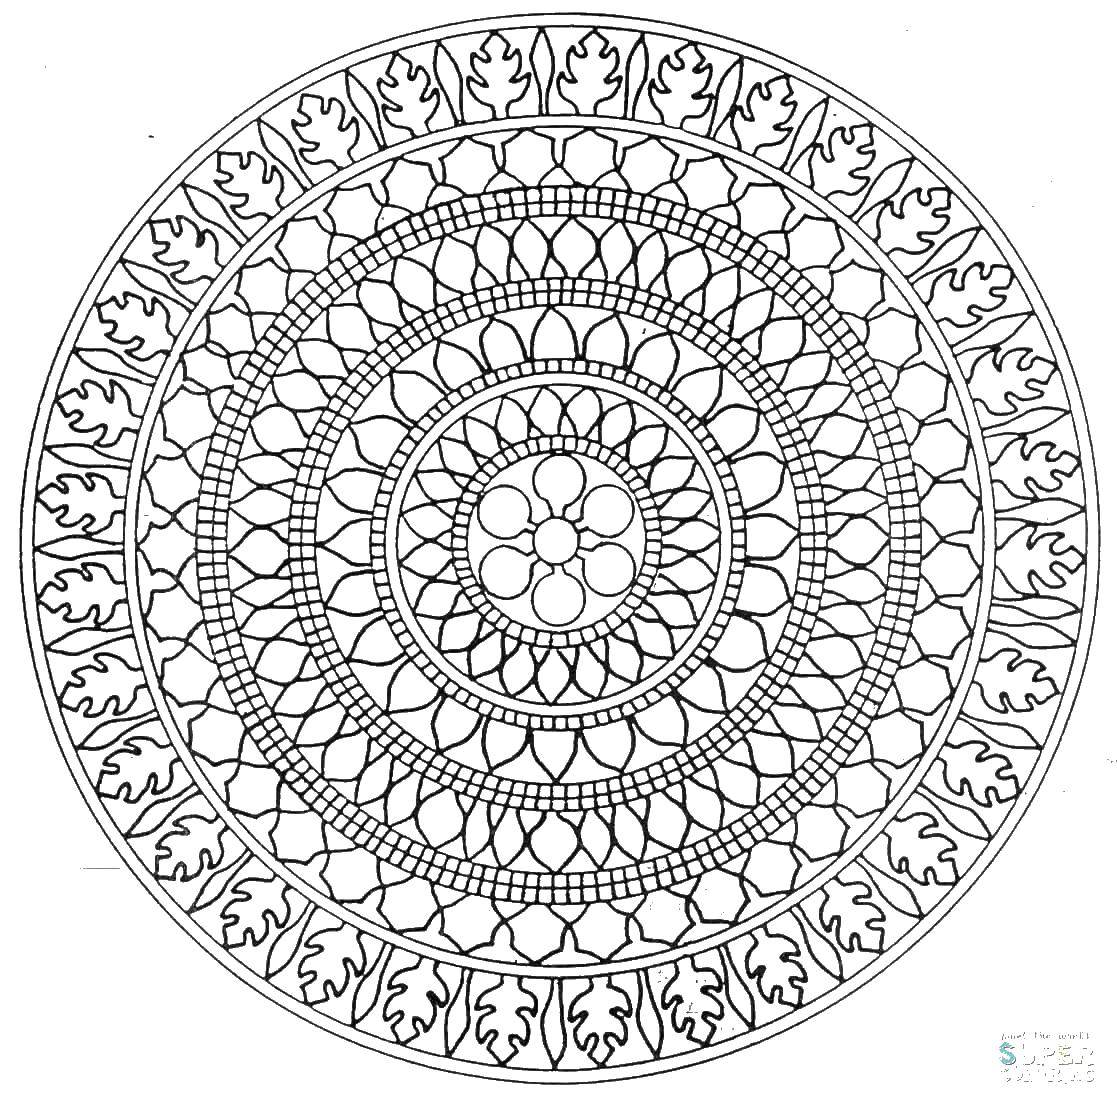 Coloring Circular pattern. Category coloring antistress. Tags:  the antistress, patterns, round.